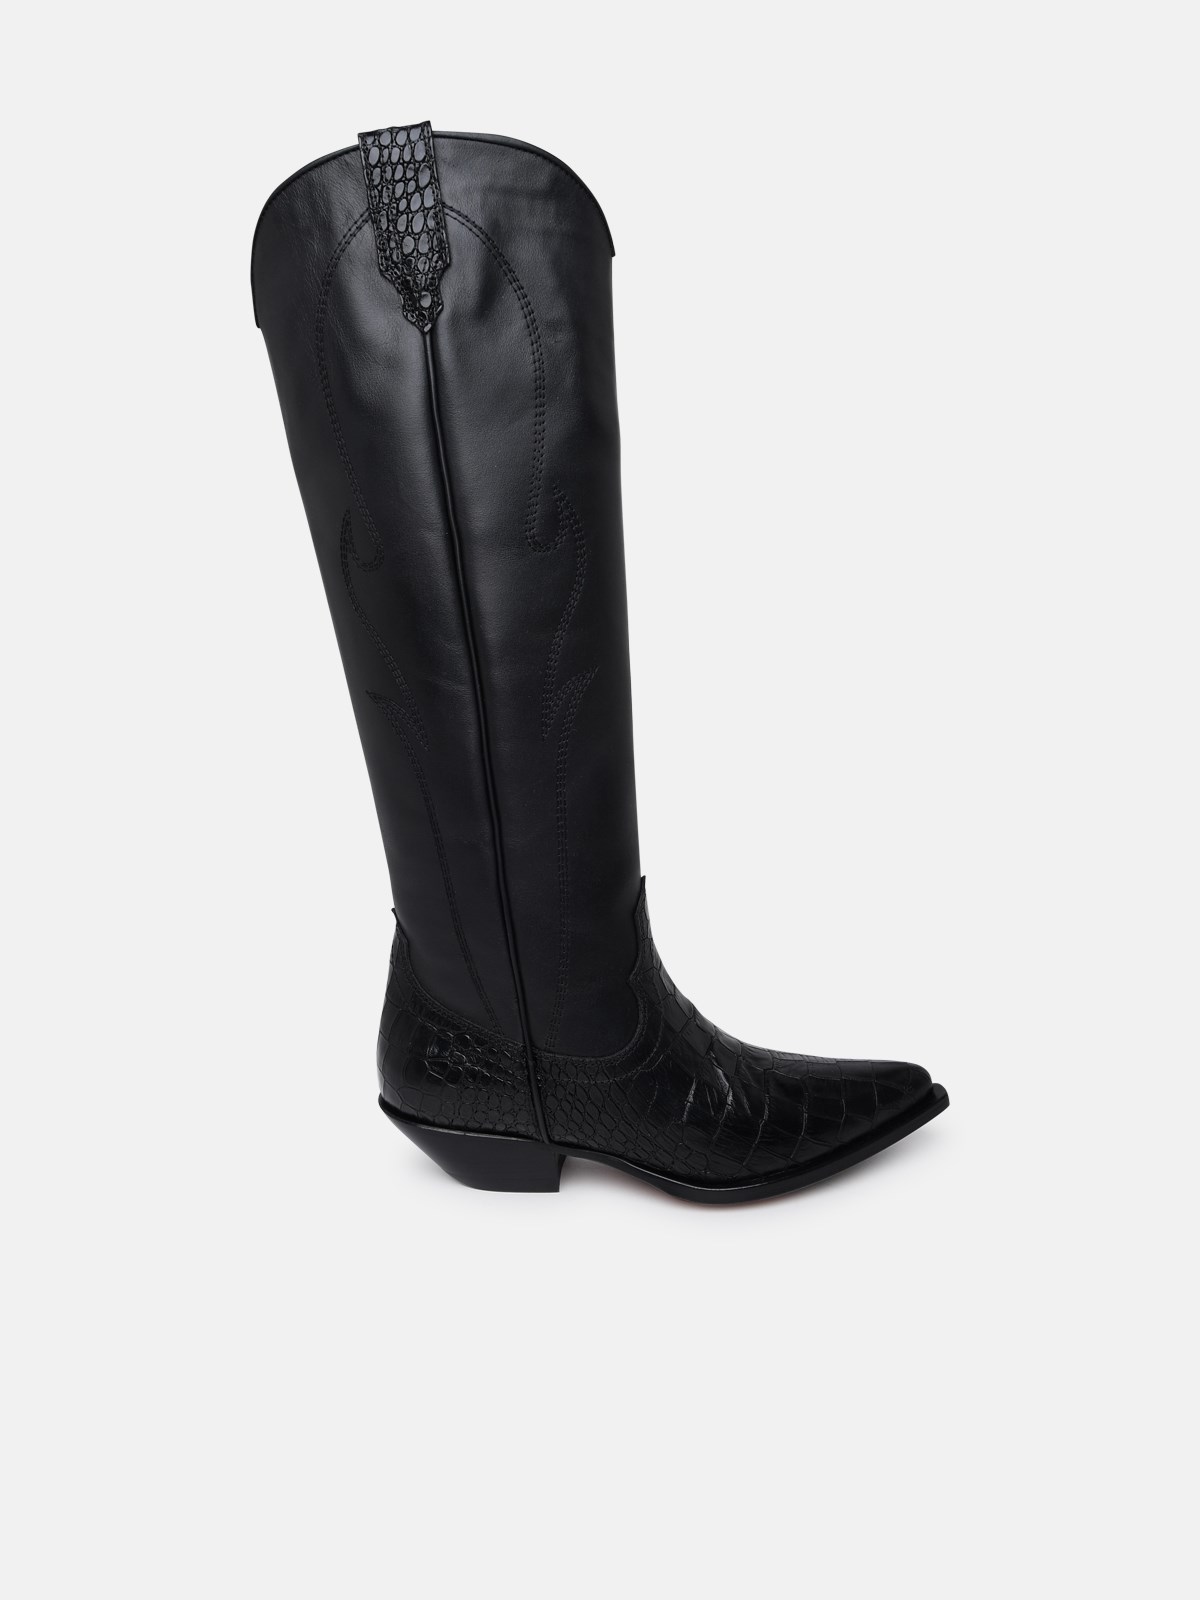 Sonora Rancho Black Leather Boots